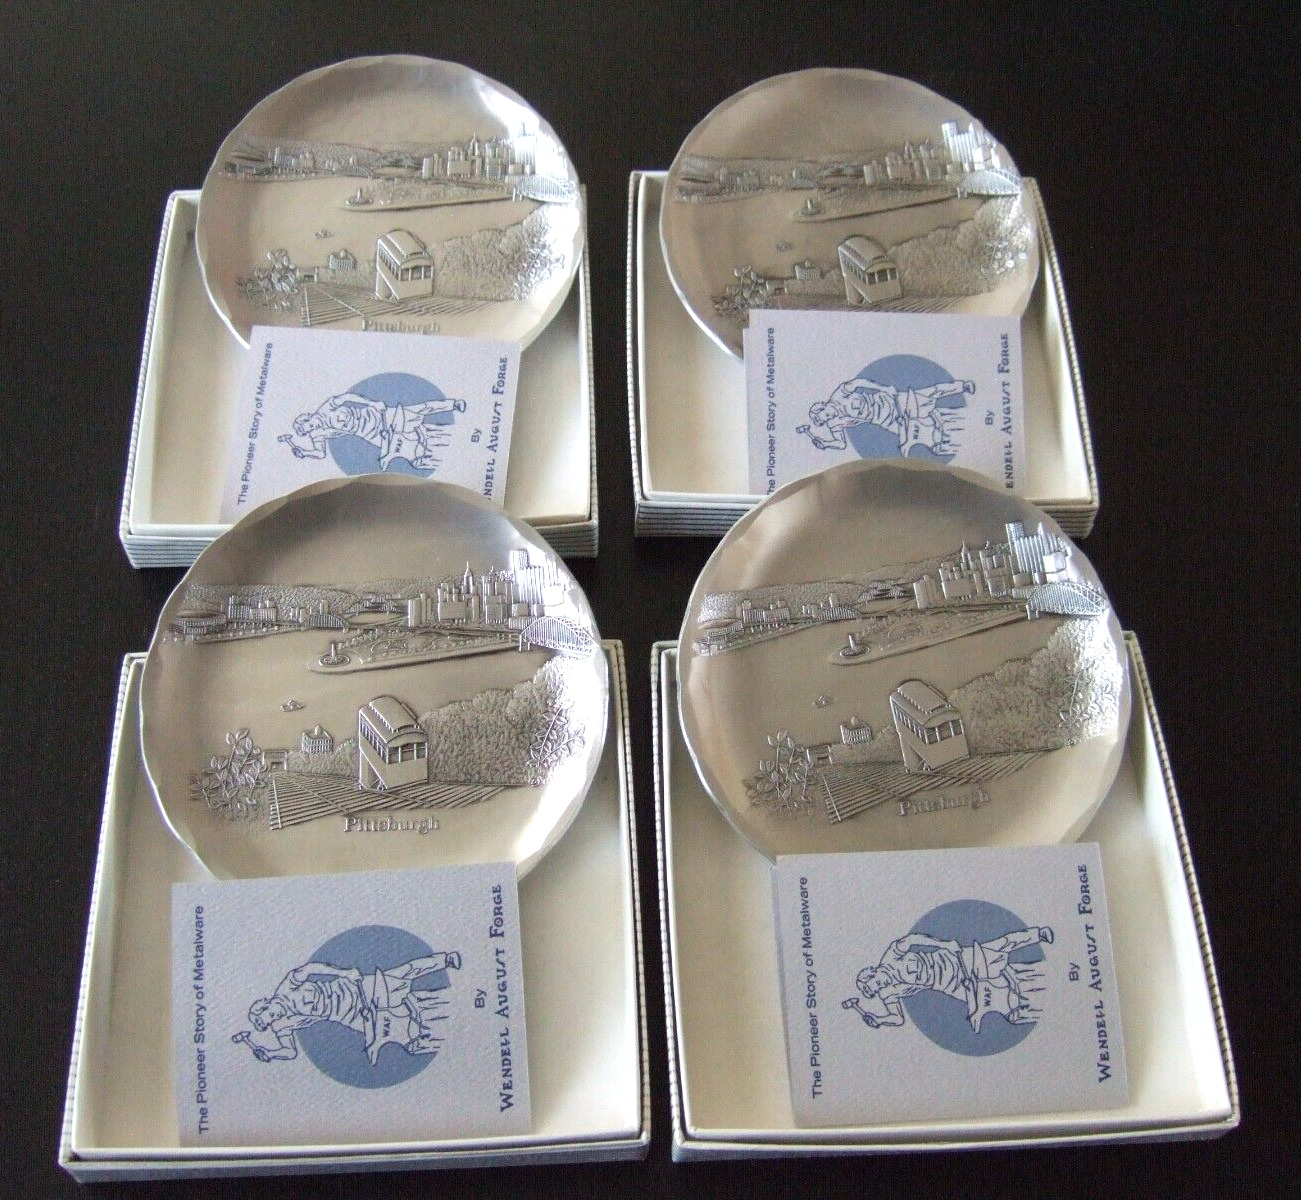 Set of 4 Wendell August Forge Pittsburgh Incline Metalware HandmadeTrays Coaster